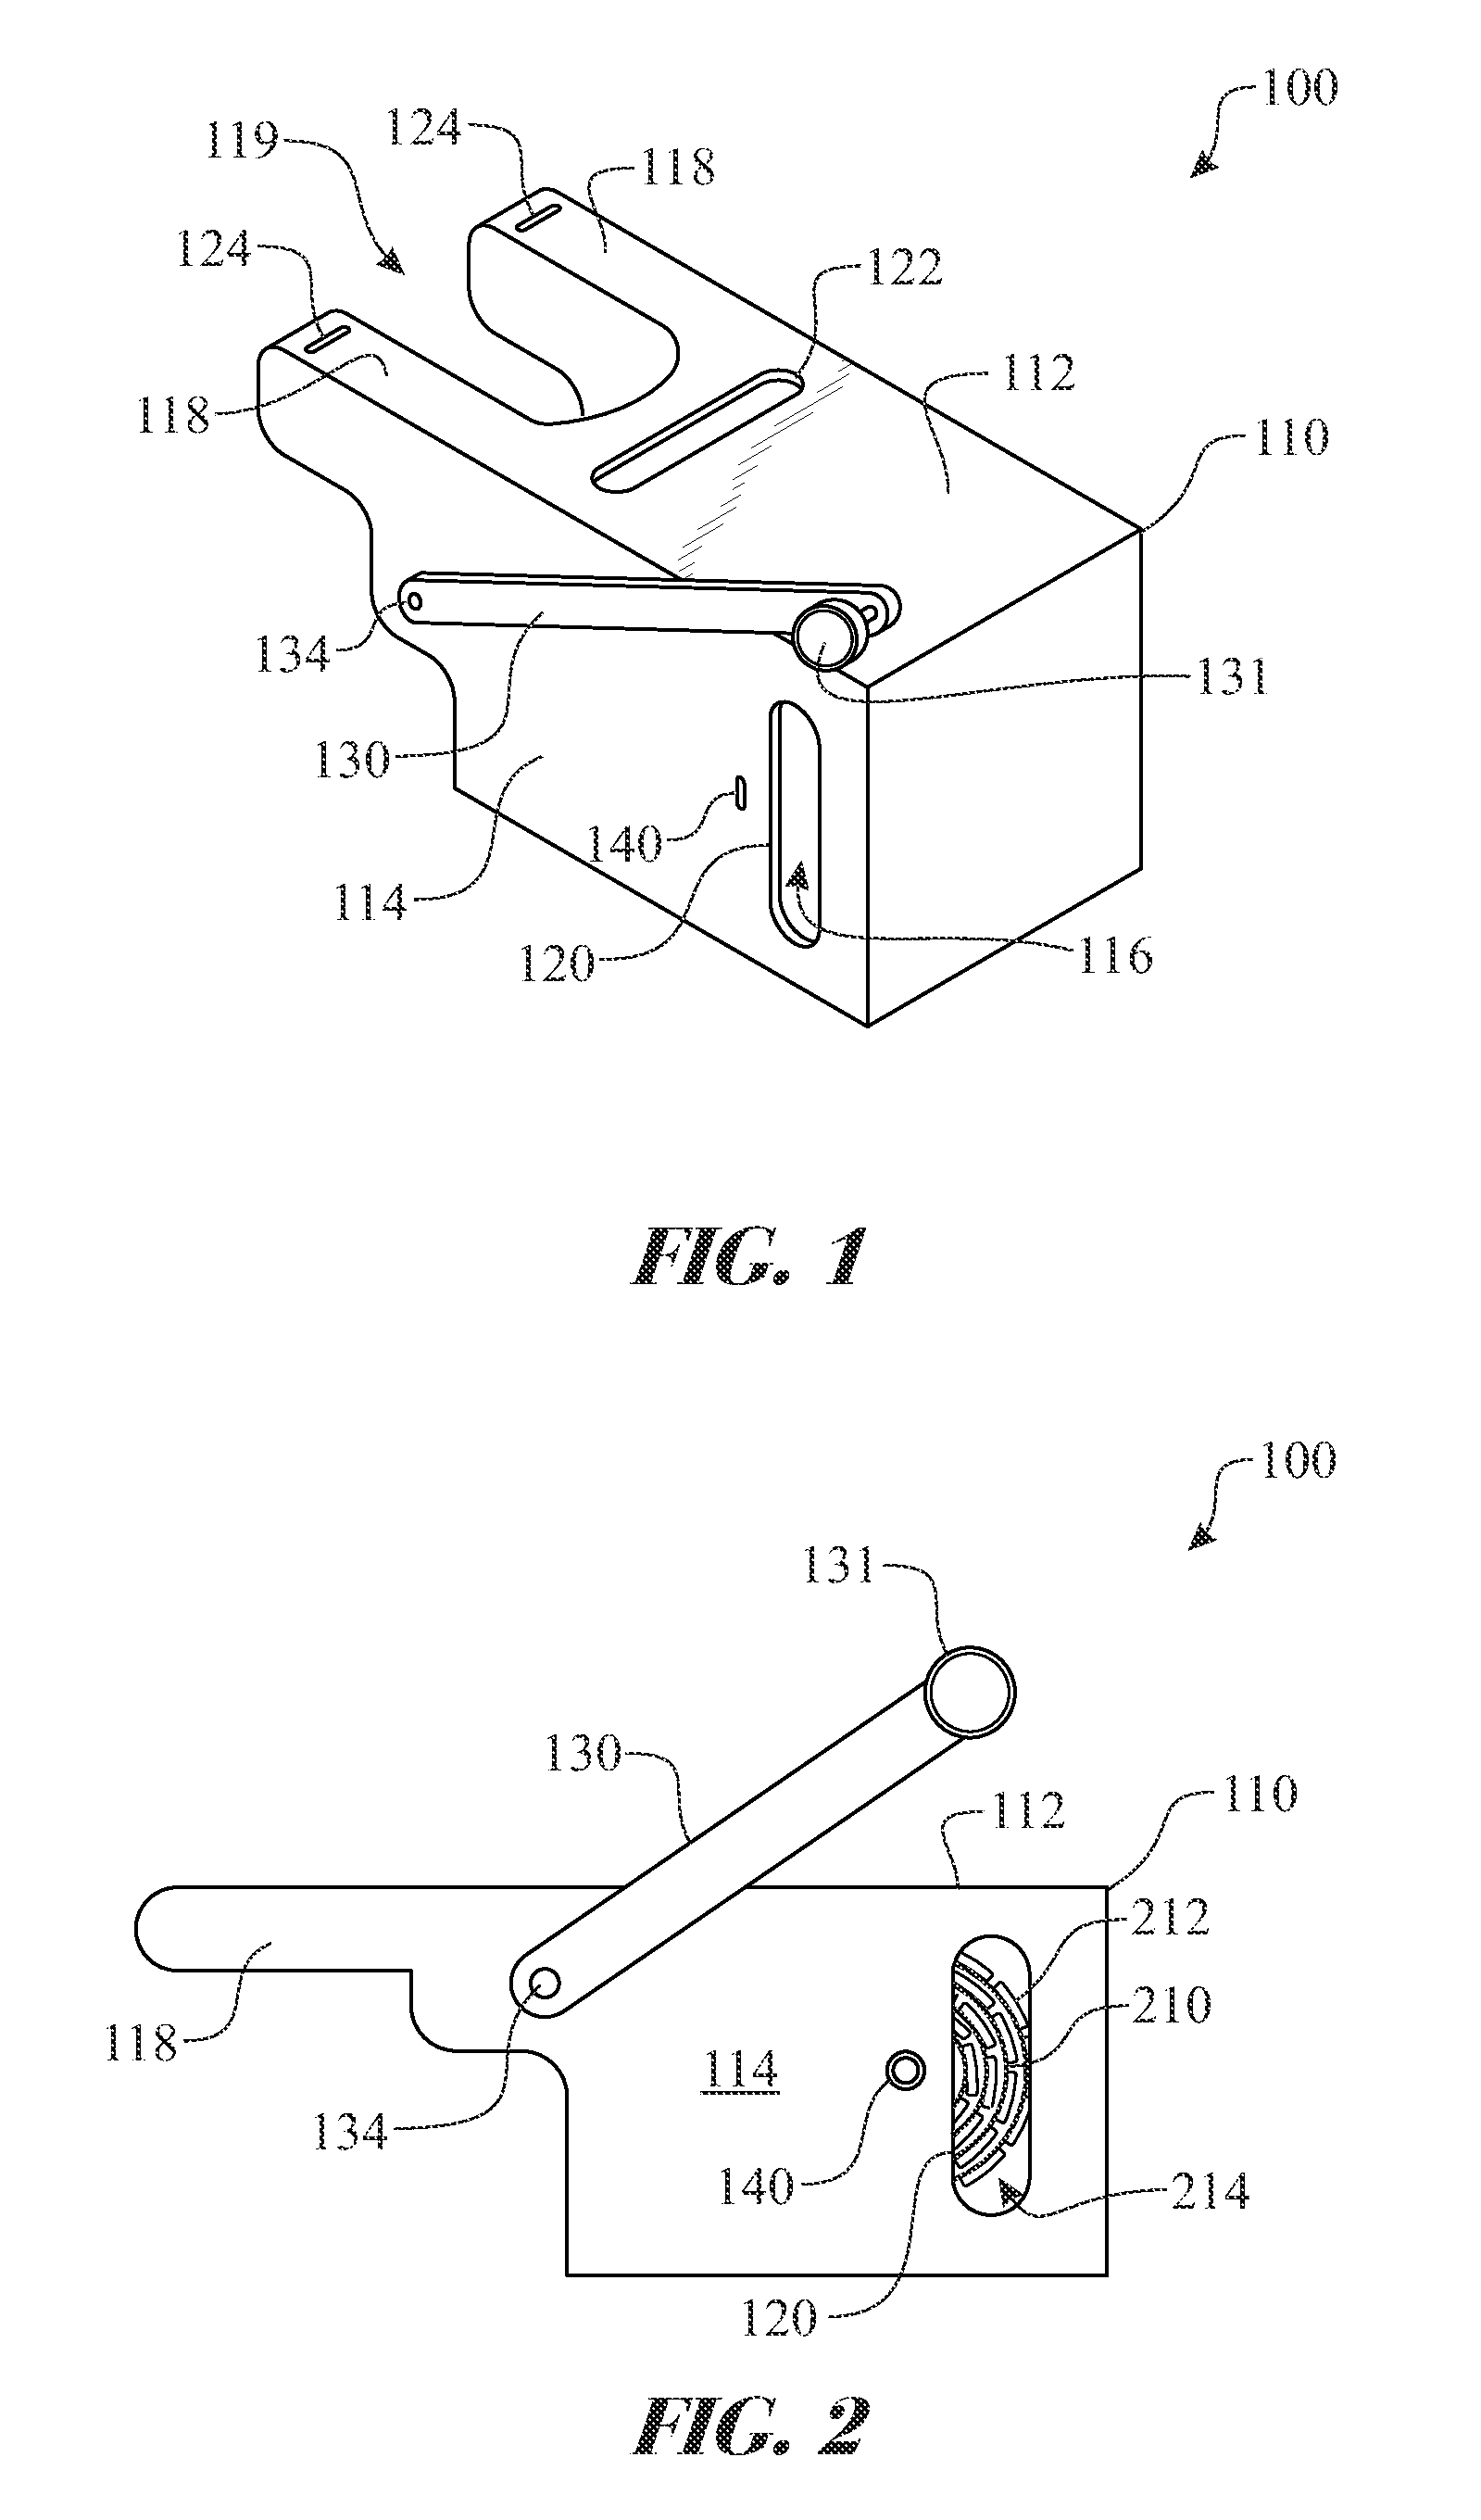 Strip arrayed stethoscope covers and dispensing apparatus